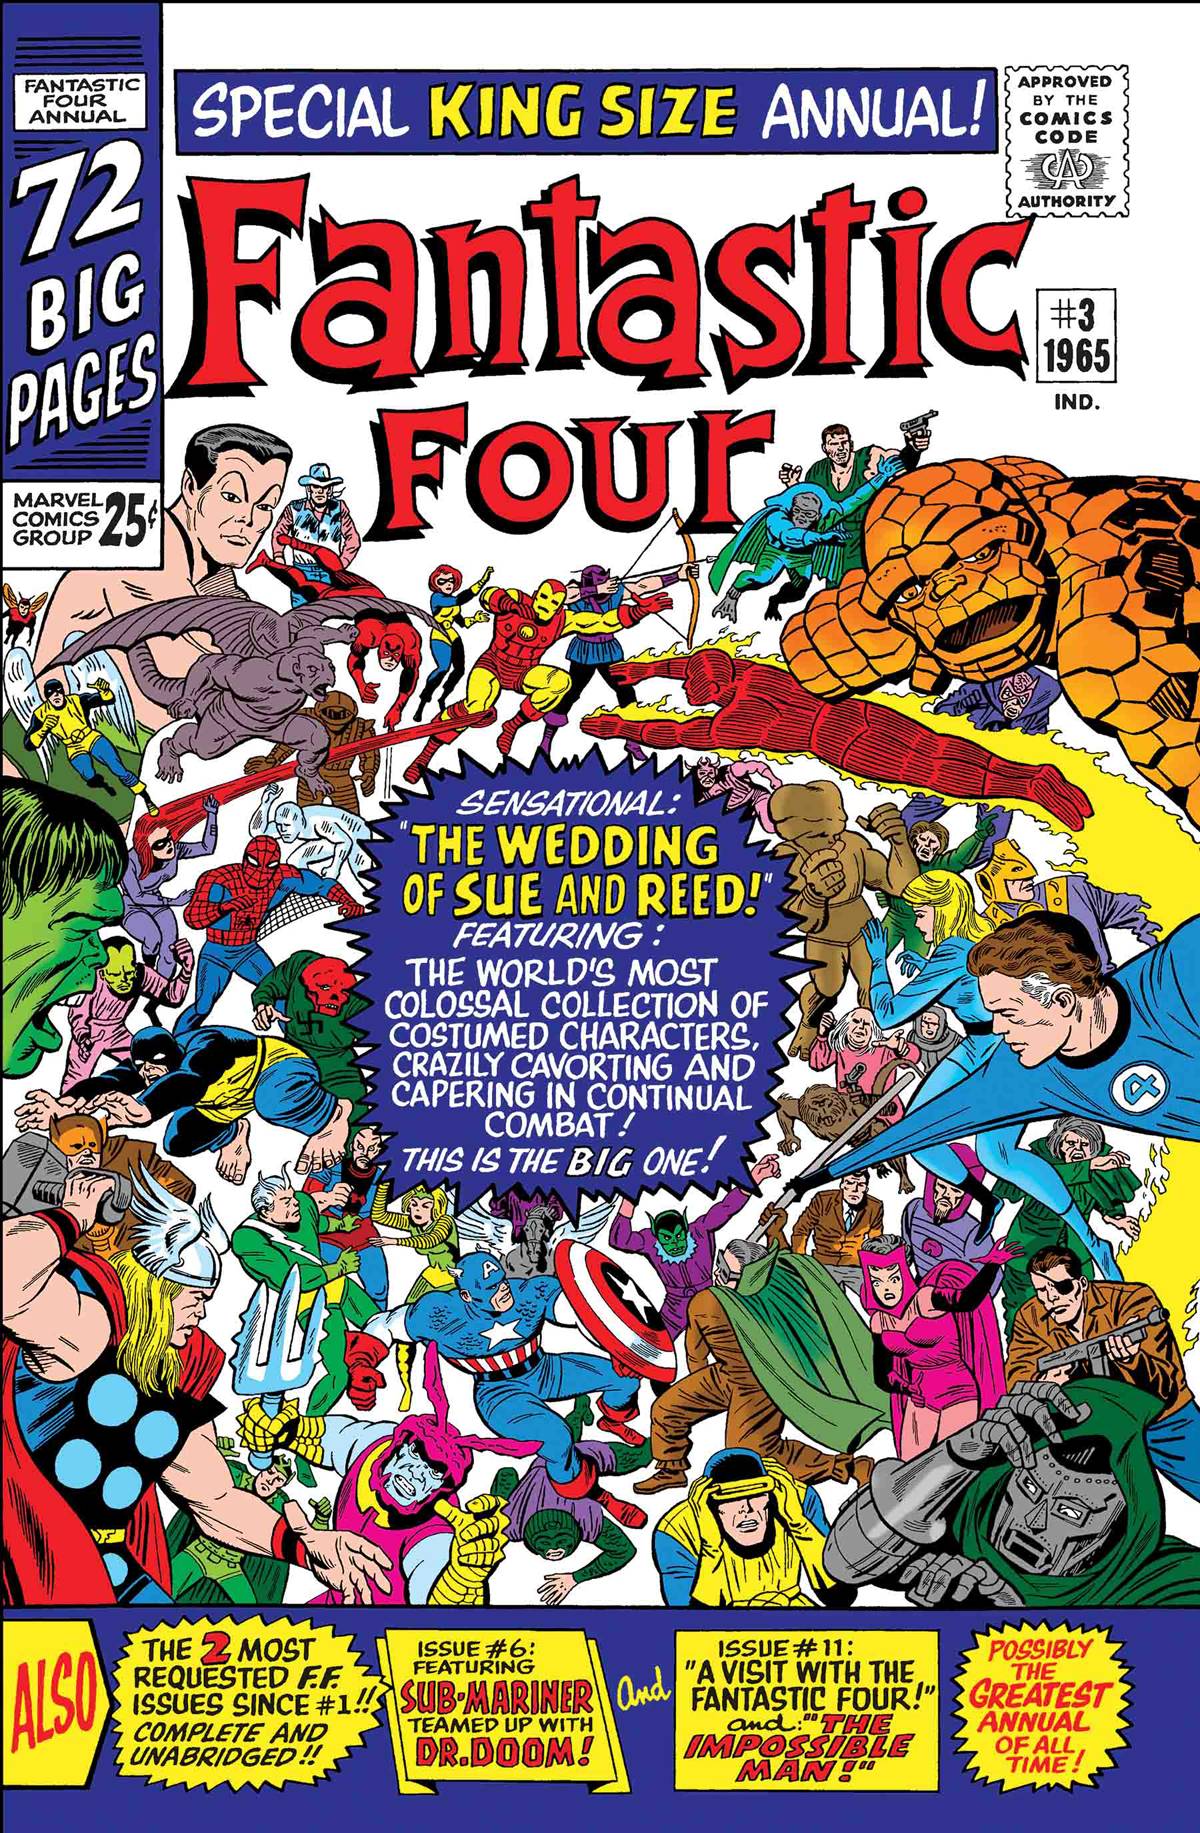 TRUE BELIEVERS FANTASTIC FOUR WEDDING REED AND SUE #1 FOC 06/11 RELEASE DATE 07/04